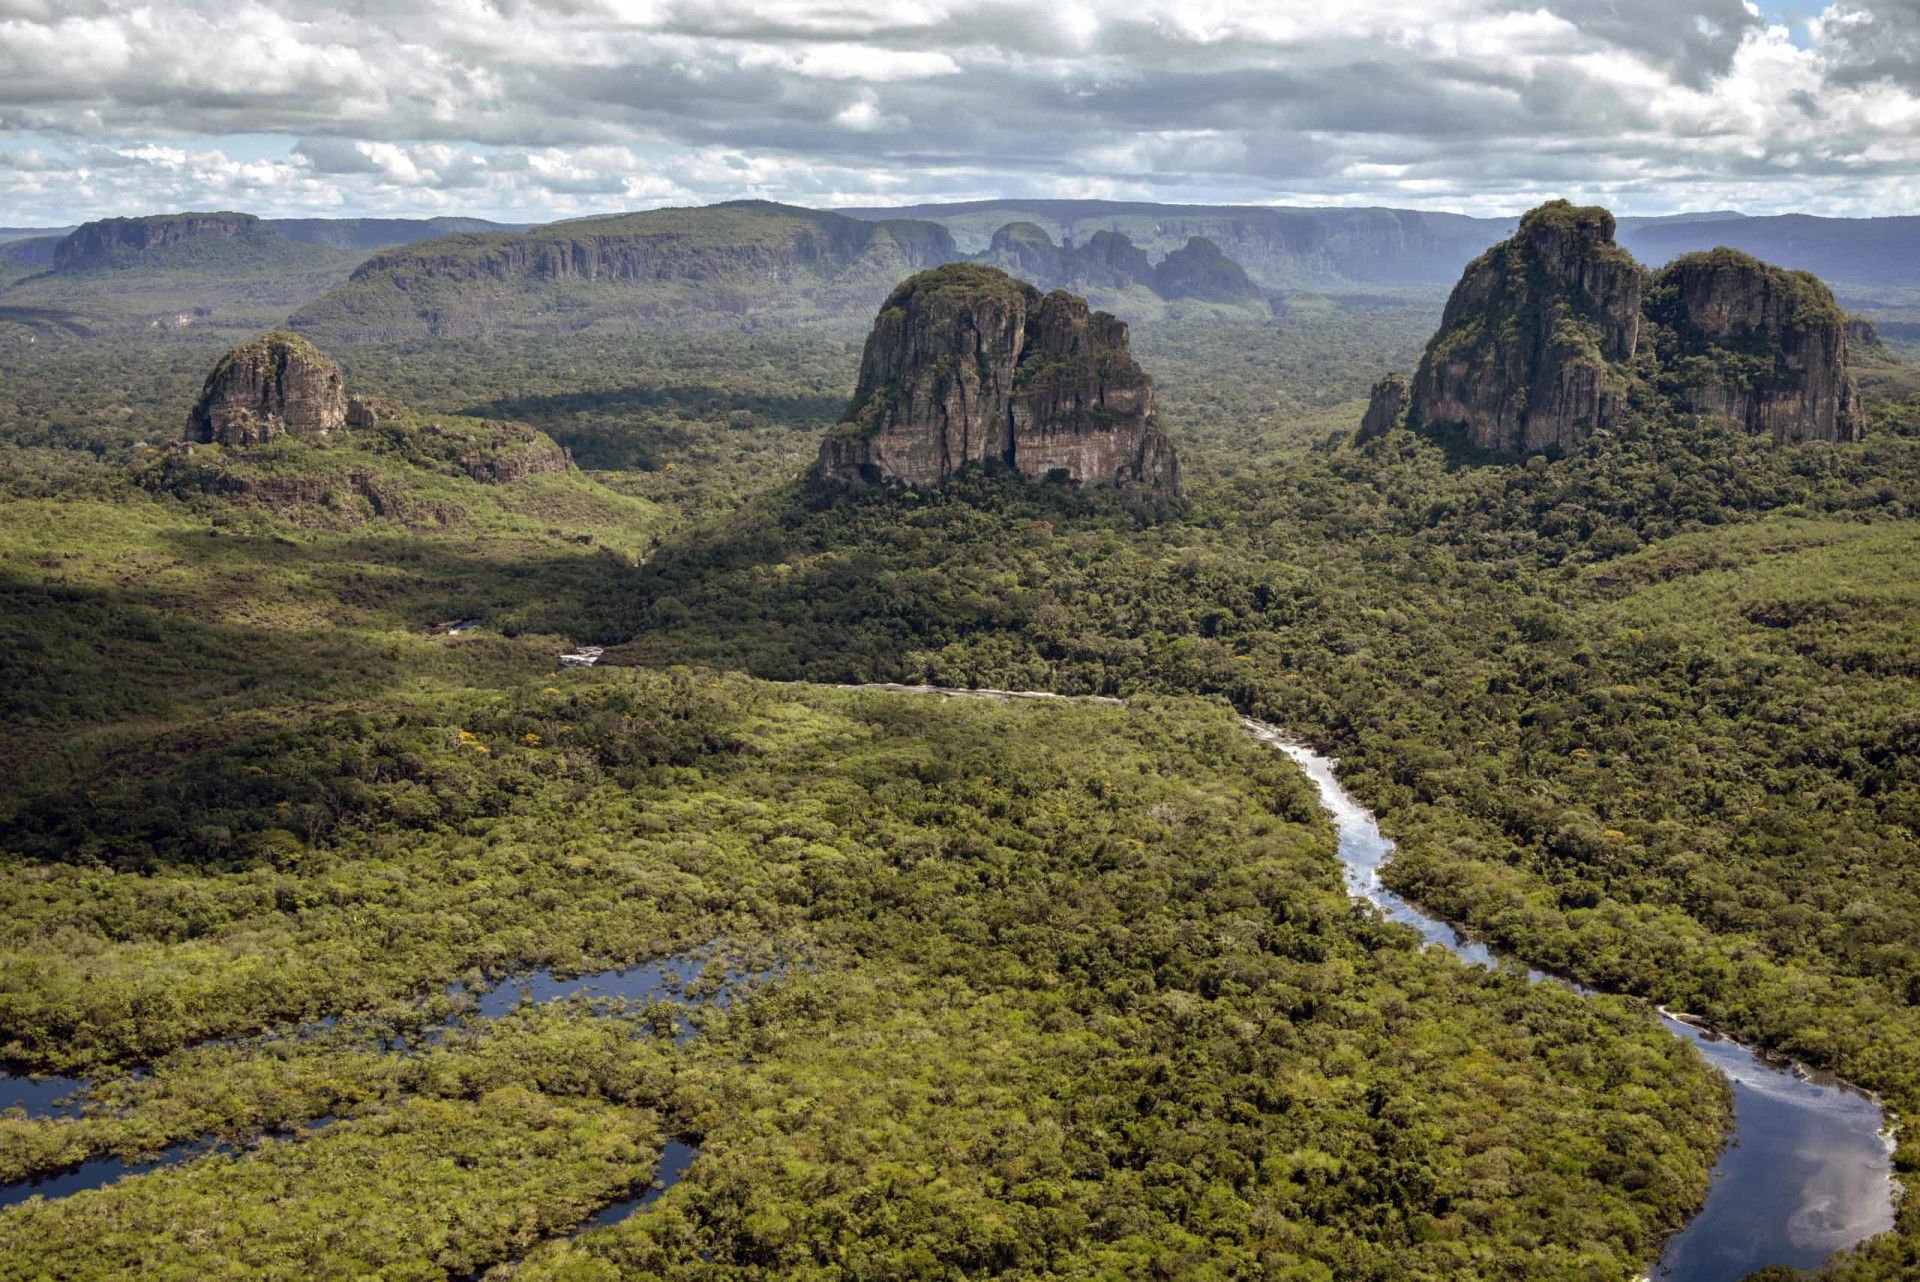 <p>Location: Caquetá and Guaviare Departments<br>Criteria: Mixed<br>Year established: 2018<br>Description: The largest national park in Colombia, and the largest tropical rain forest national park in the world, Chiribiquete's defining features include the tabletop mountains known as tepuis (pictured) and over 75,000 cave paintings, some more than 20,000 years old, believed to be linked to the worship of the jaguar.</p><p><a href="https://www.msn.com/en-us/community/channel/vid-7xx8mnucu55yw63we9va2gwr7uihbxwc68fxqp25x6tg4ftibpra?cvid=94631541bc0f4f89bfd59158d696ad7e">Follow us and access great exclusive content every day</a></p>